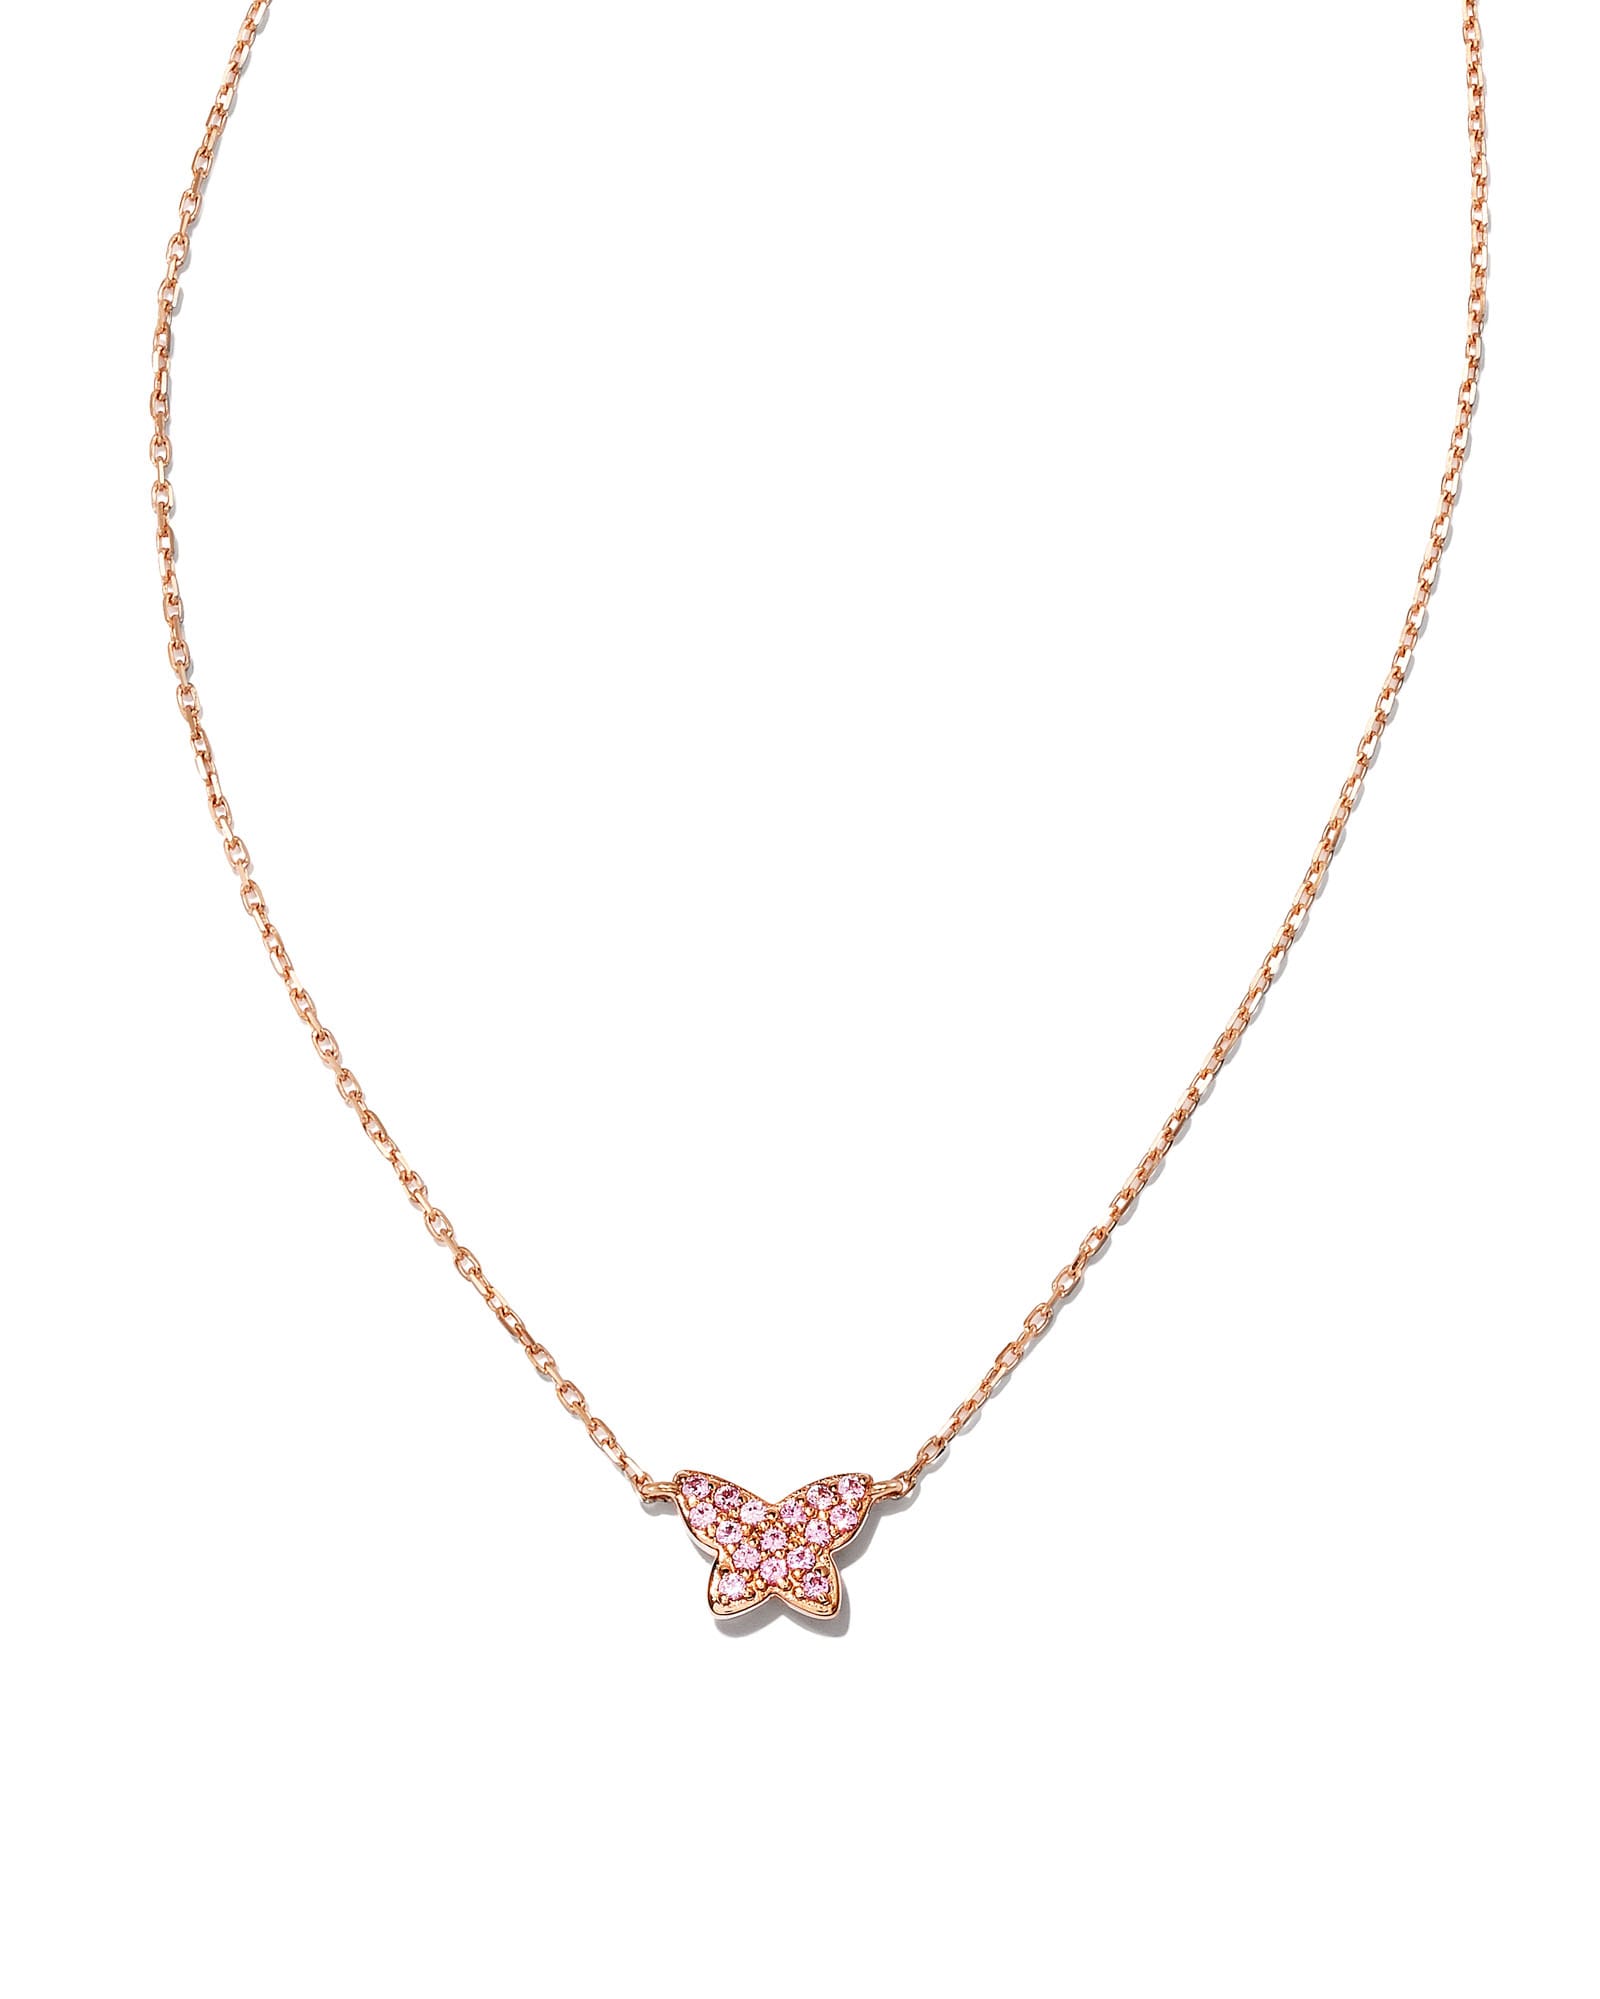 Butterfly 14k Rose Gold Pendant Necklace in Pink Sapphire | Kendra Scott